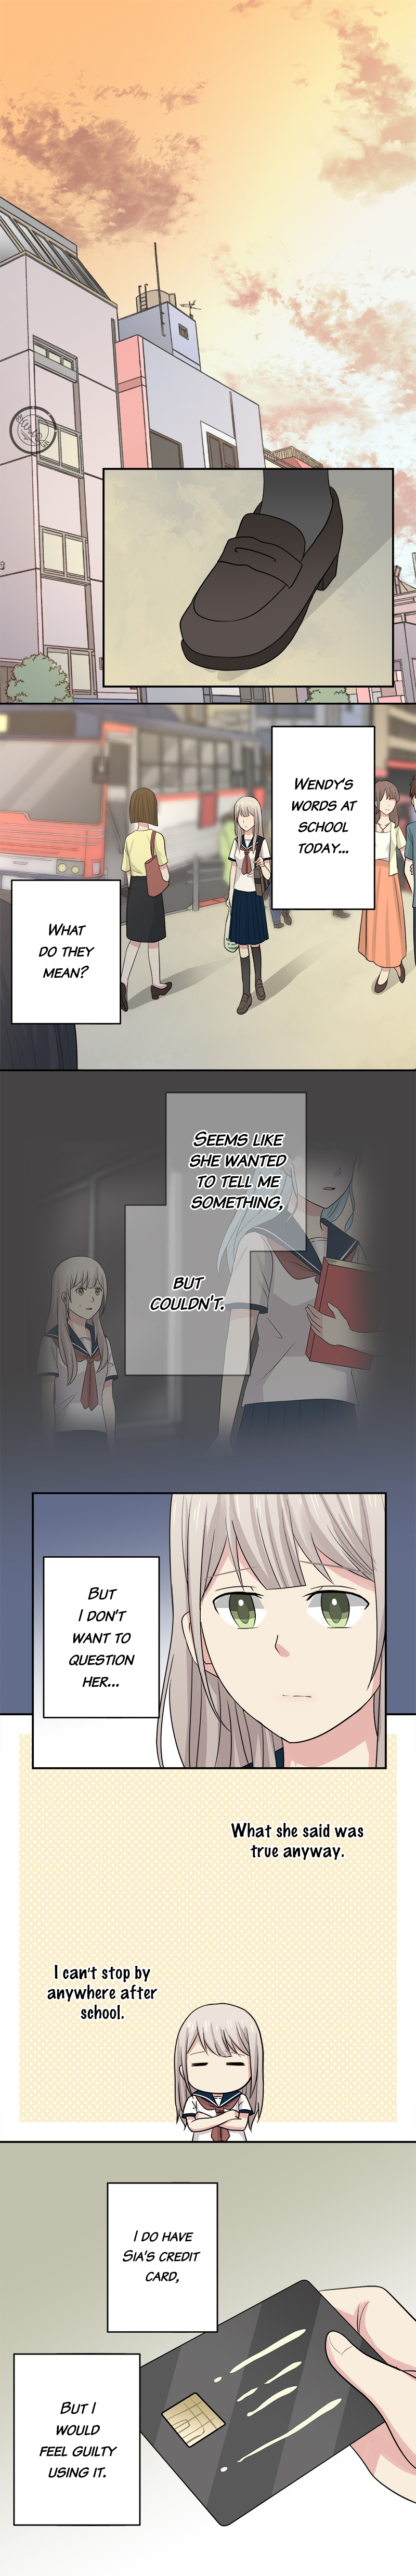 Switched Girls - Page 1